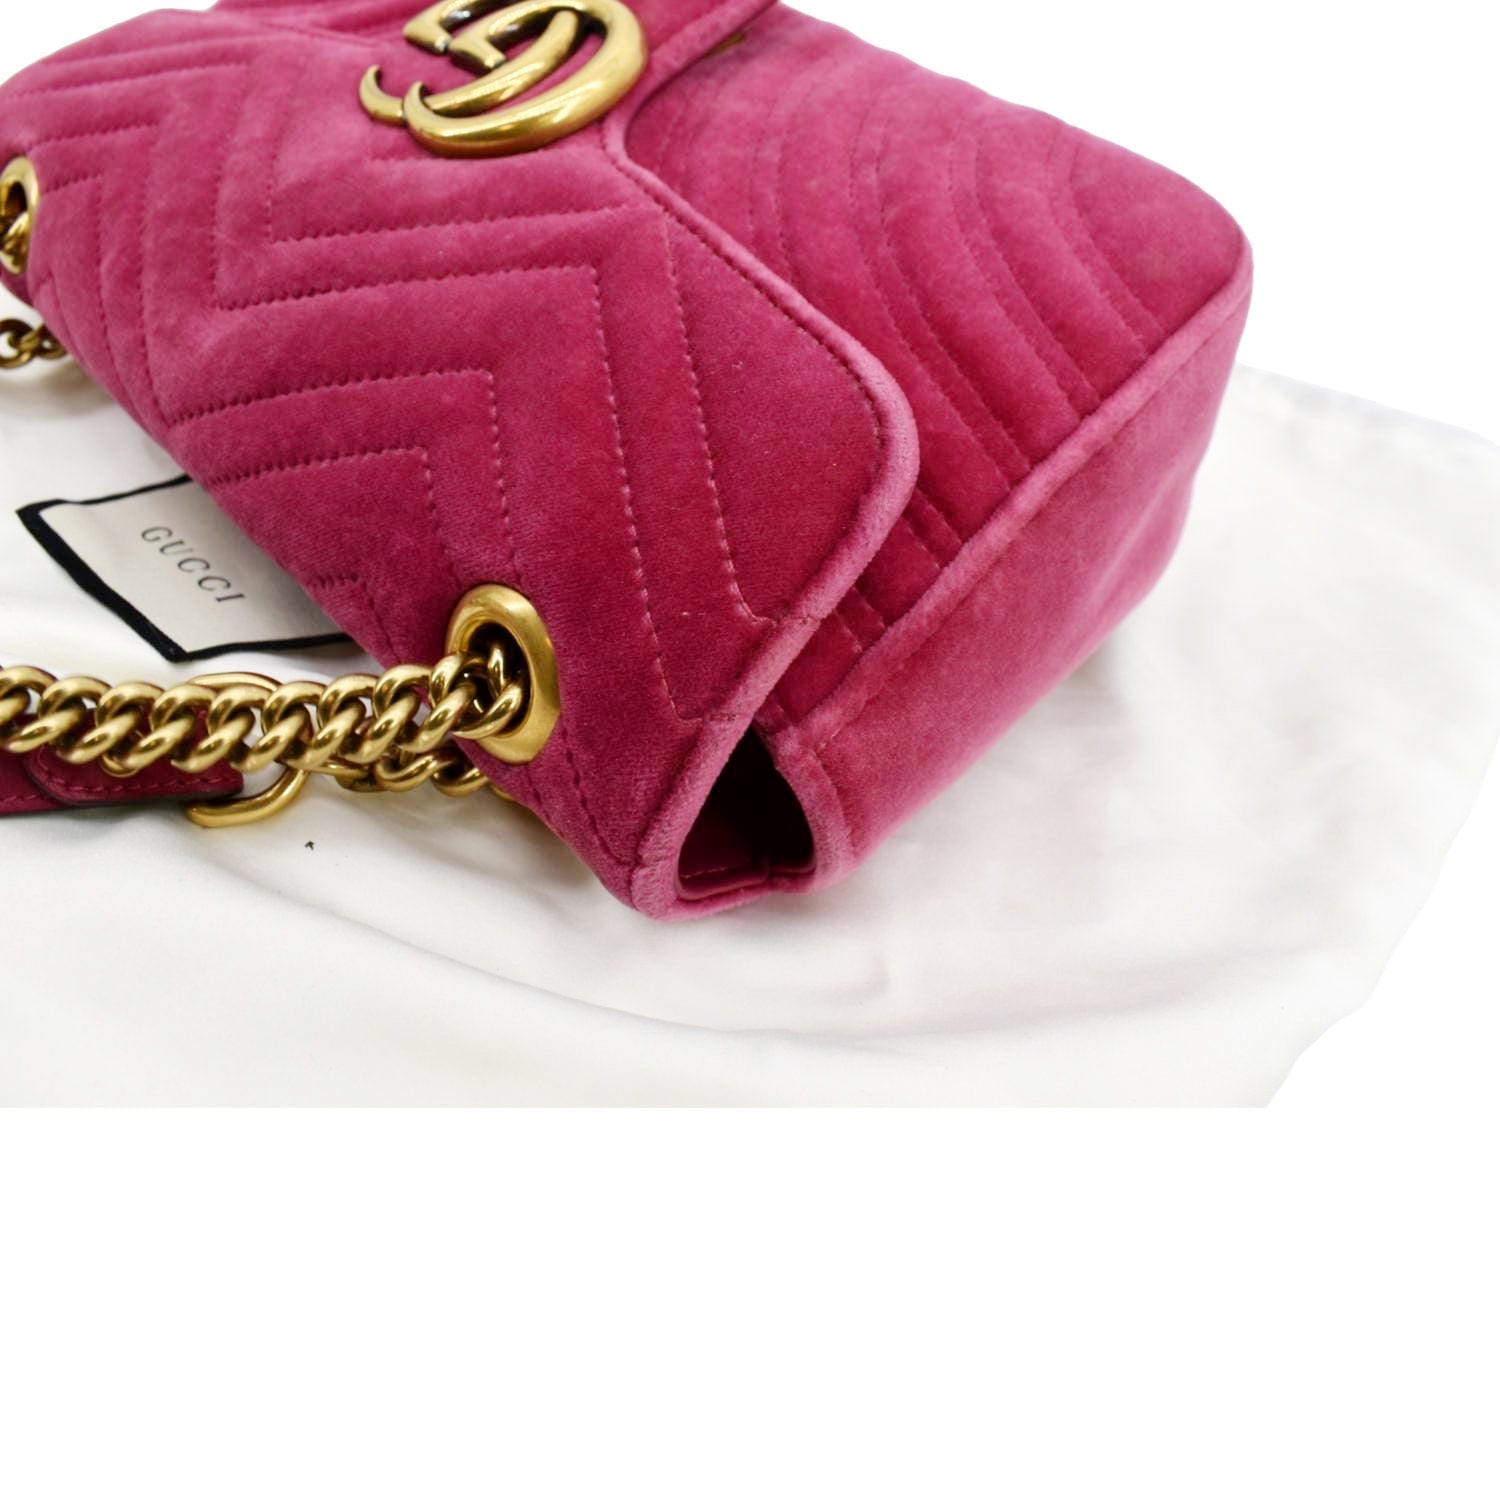 Authentic New Gucci GG Marmont Fuchsia ChevronQuilted Velvet